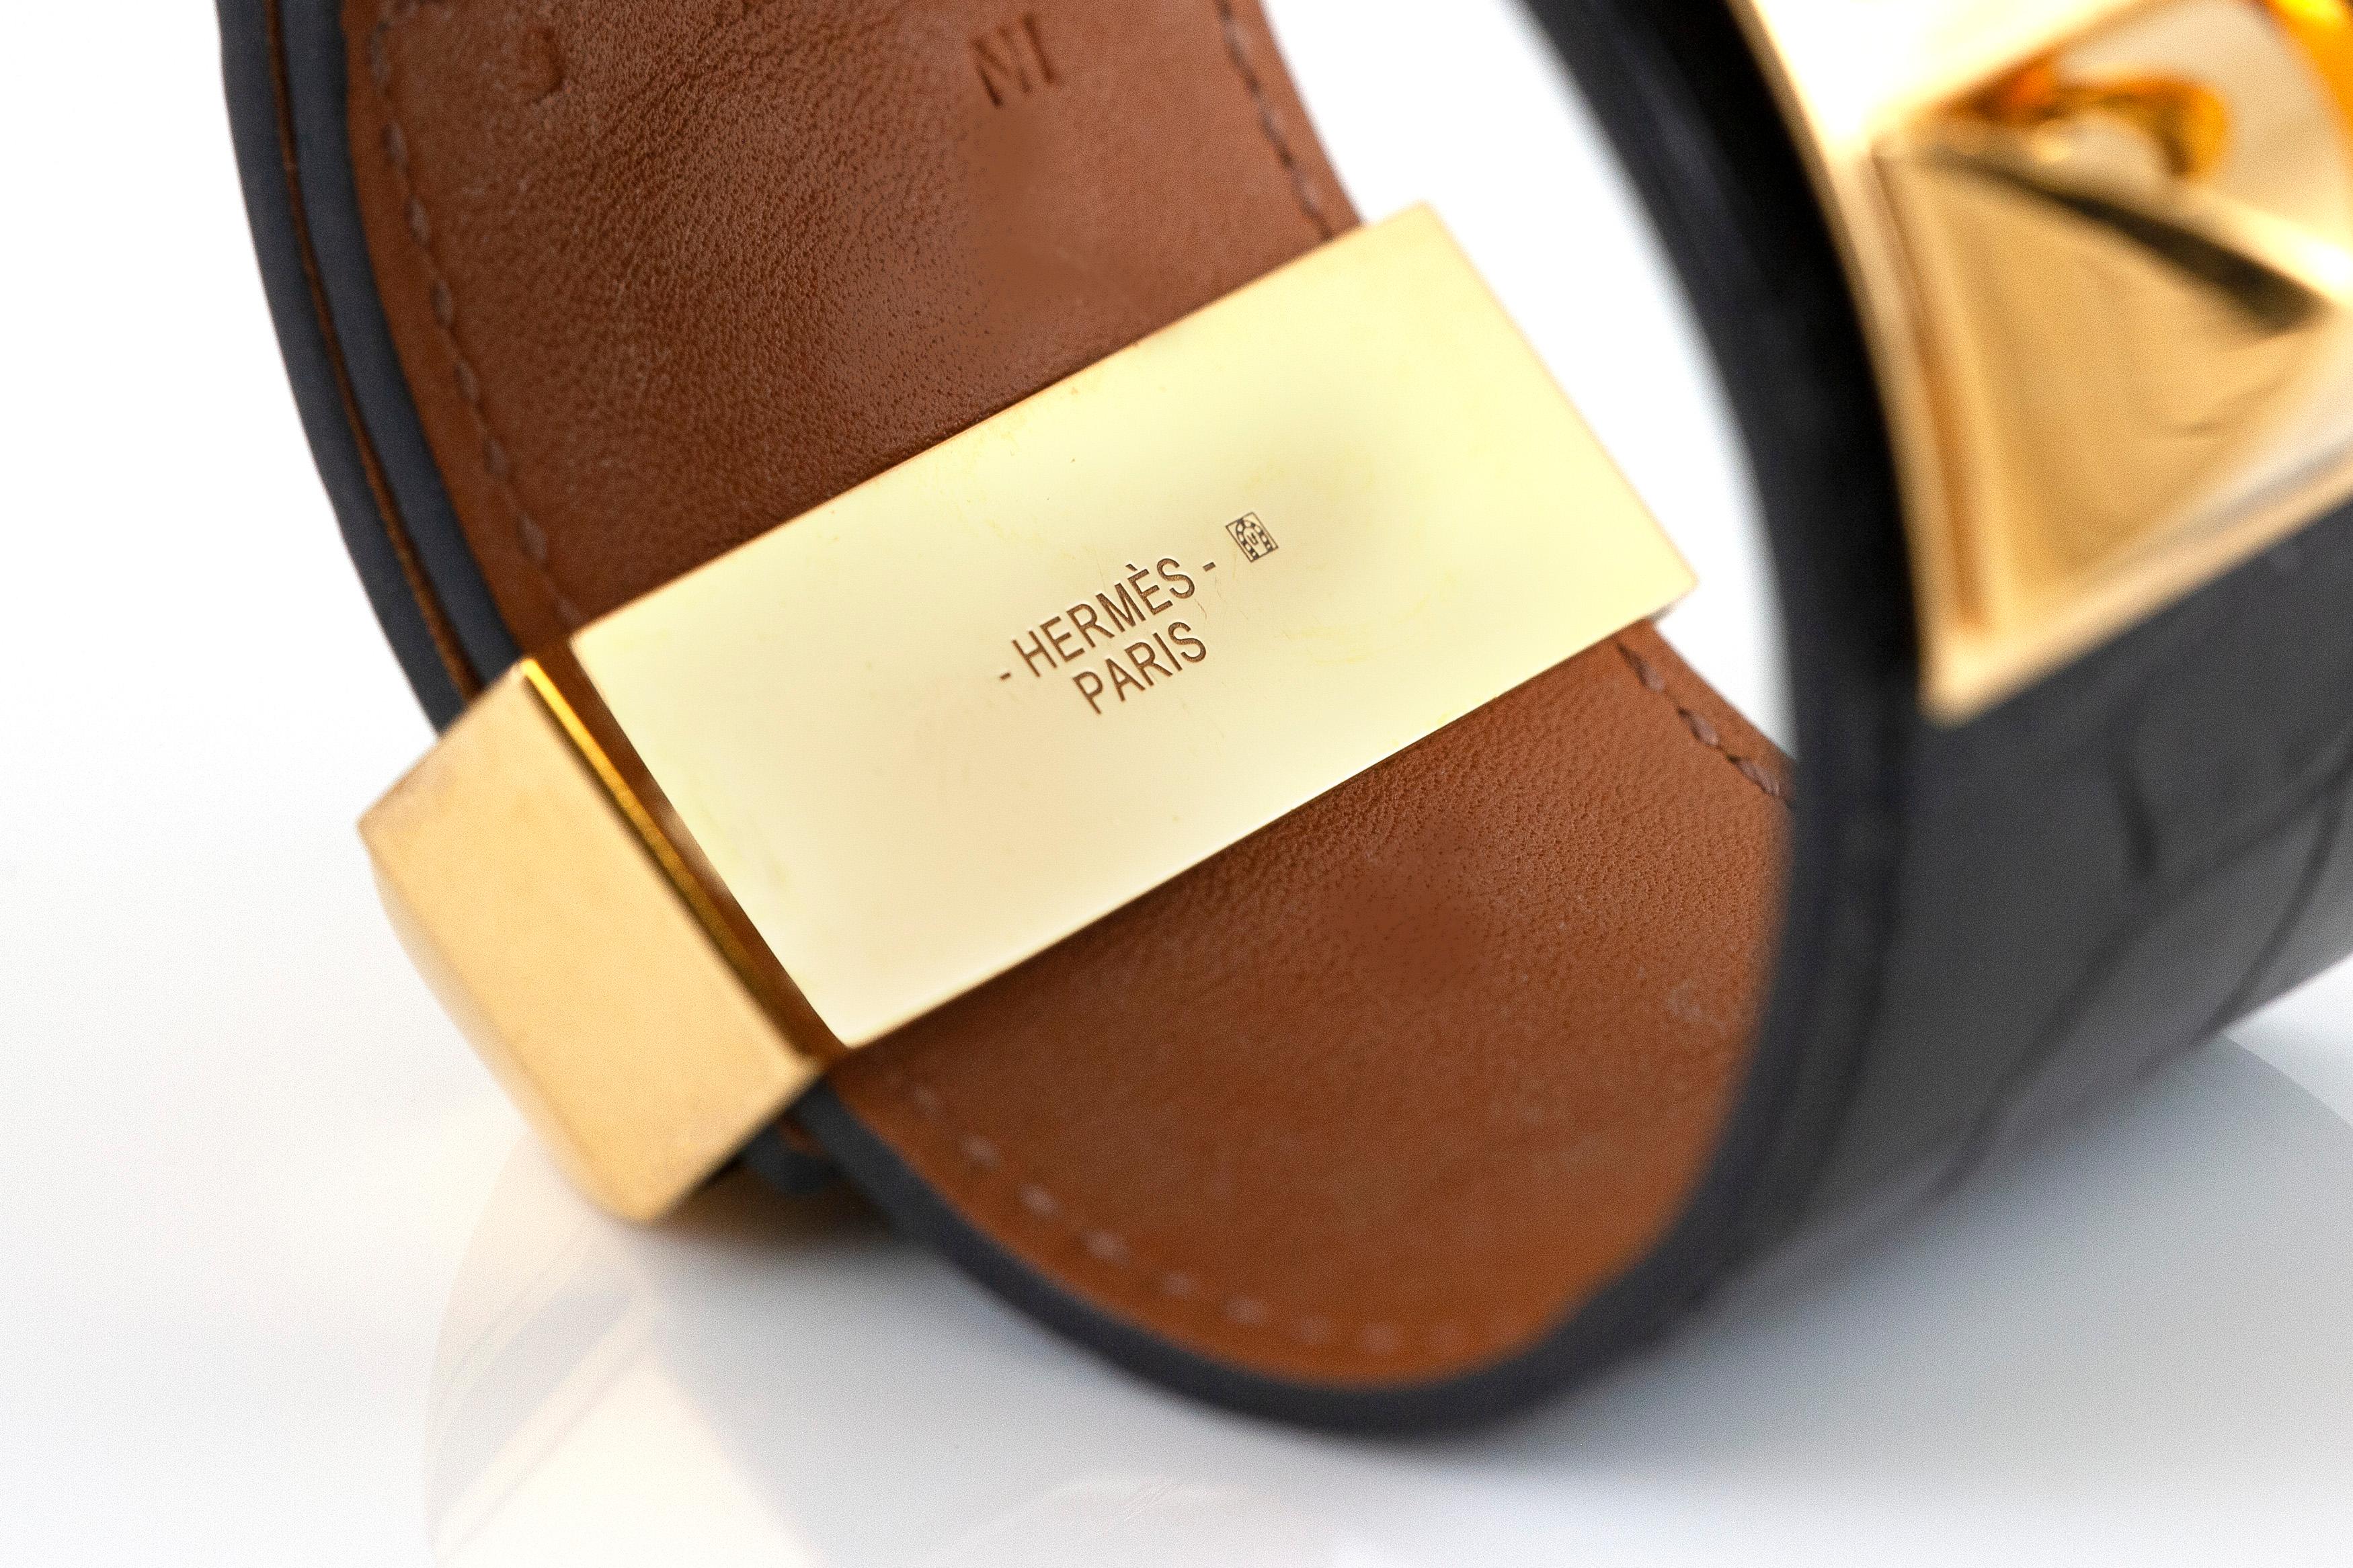 The cuff bracelet from black lizard leather and on top 18k gold.

Sign Hermes